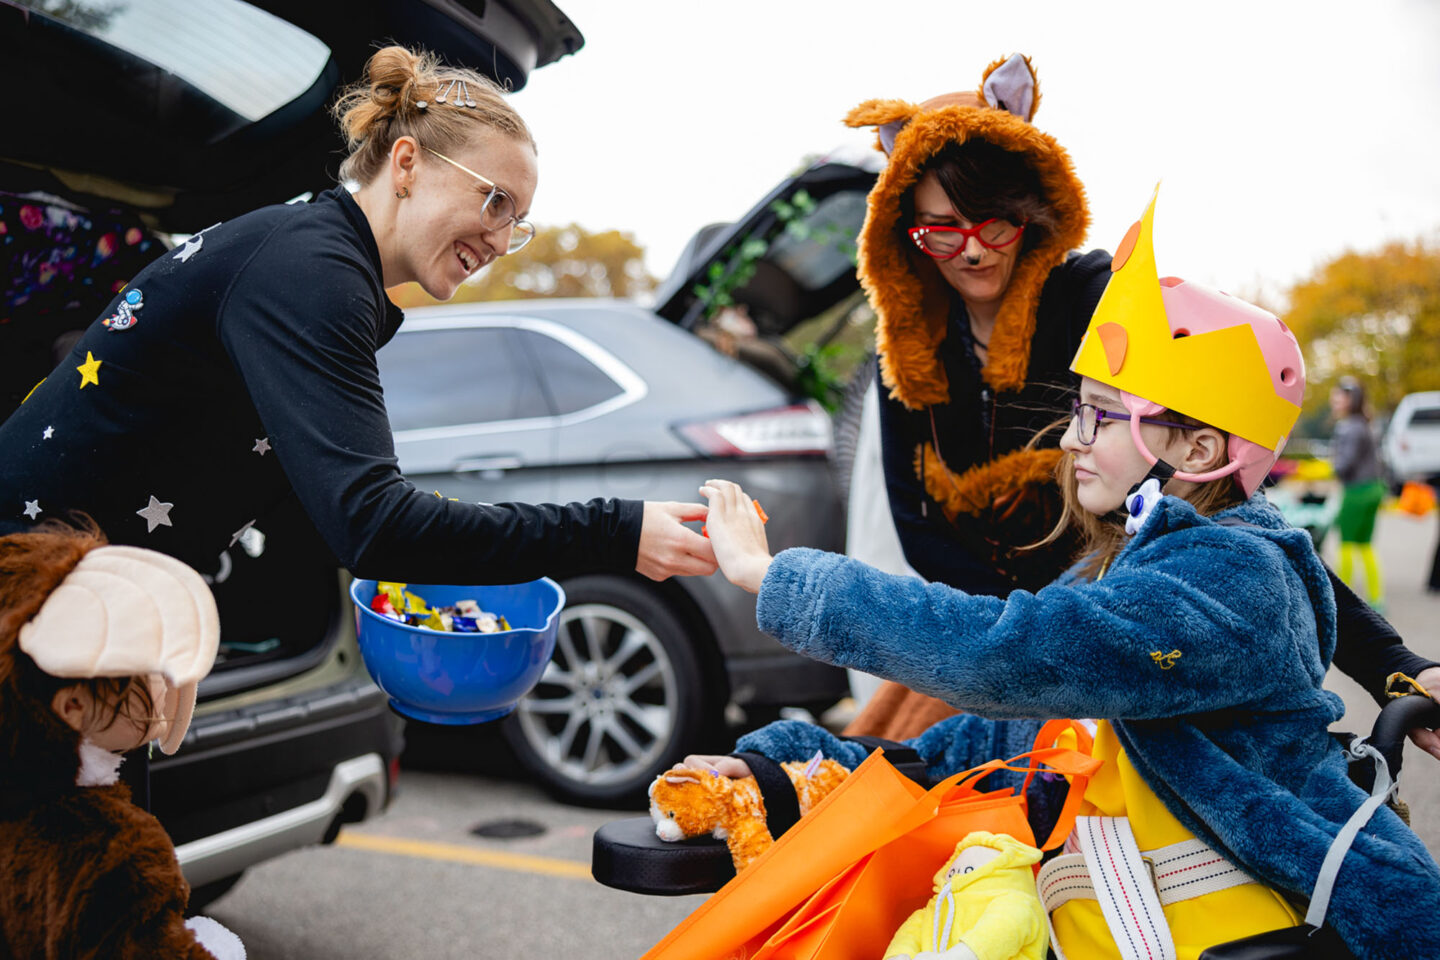 Hospital Staff Giving Treats to Patients at Trunk-O-Treat event